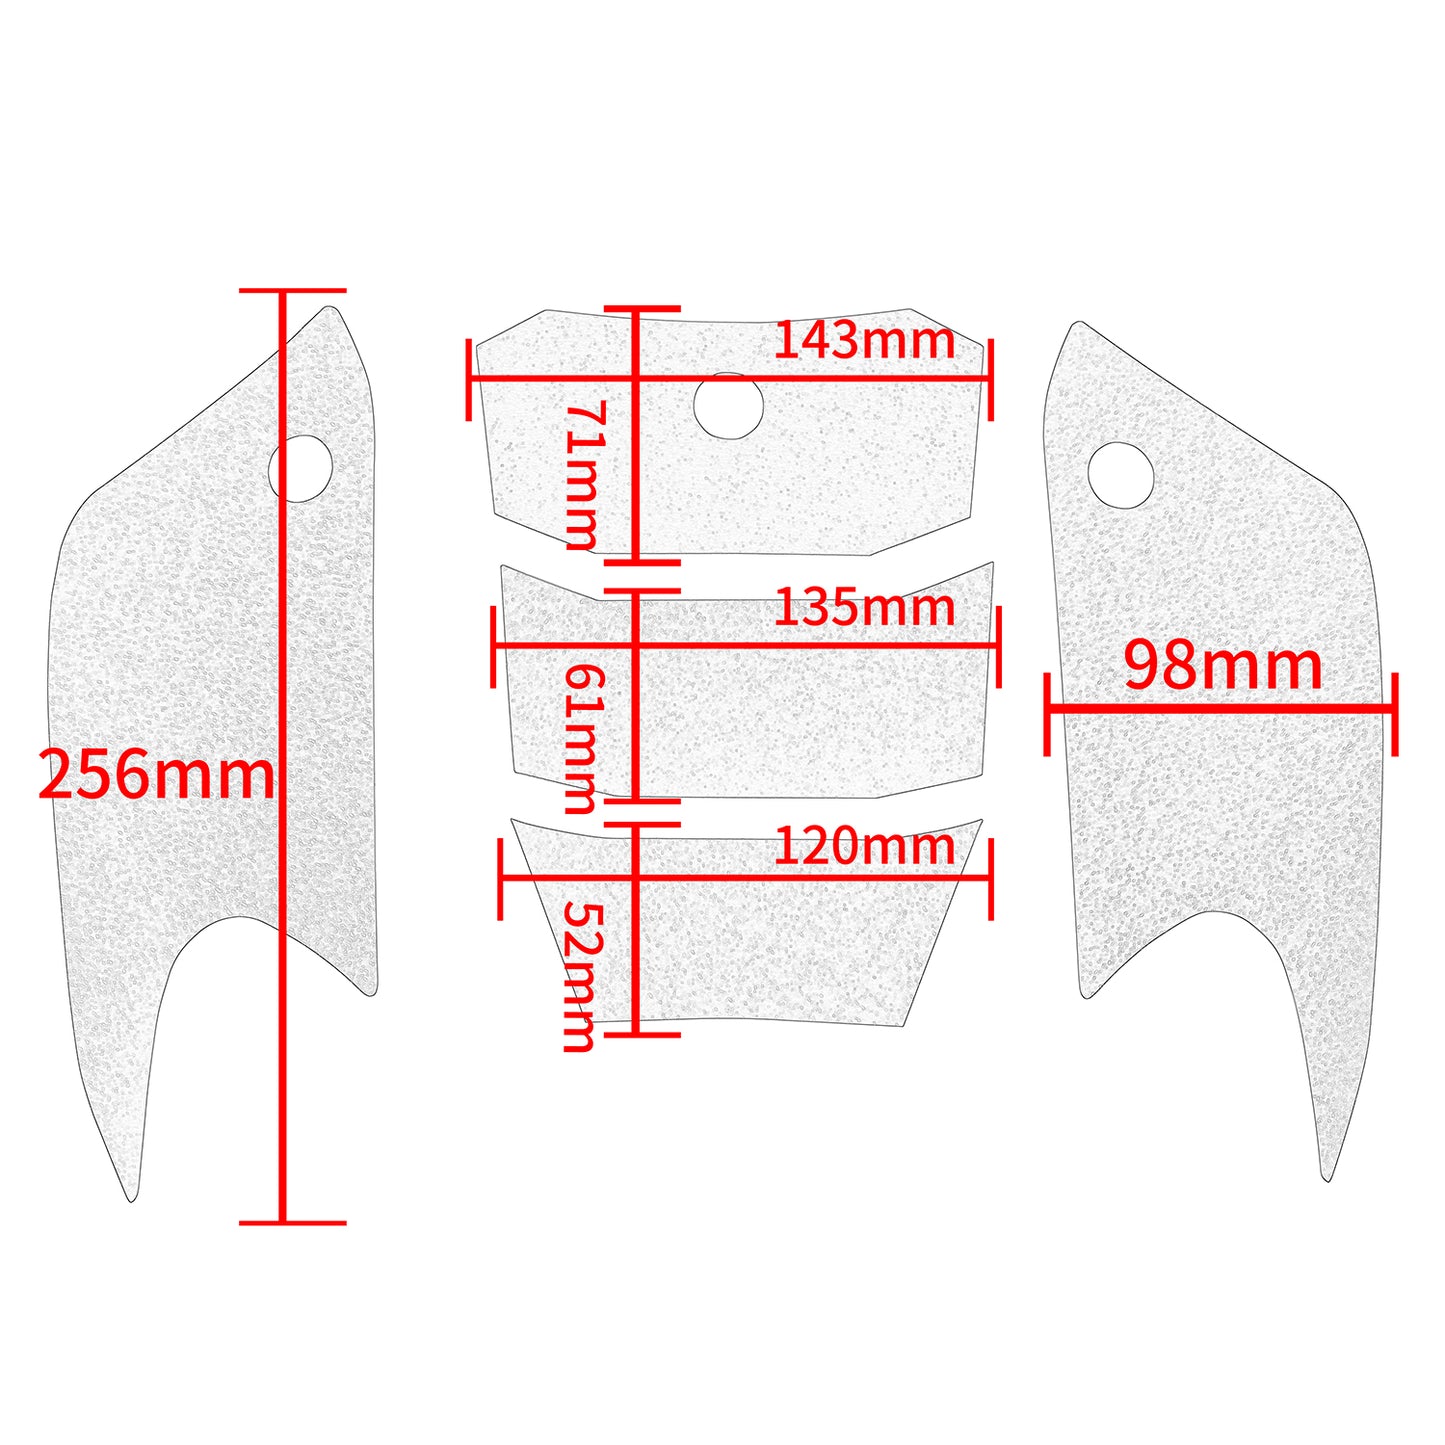 Wolfline Motorcycle Anti Slip Tank Pad Stickers Side Gas Tank Pad Knee Grip Decals Protection For Honda CB500X CB 500 X 2013 2014 2015 2016 2017 2018 2019 2020 2021 2022